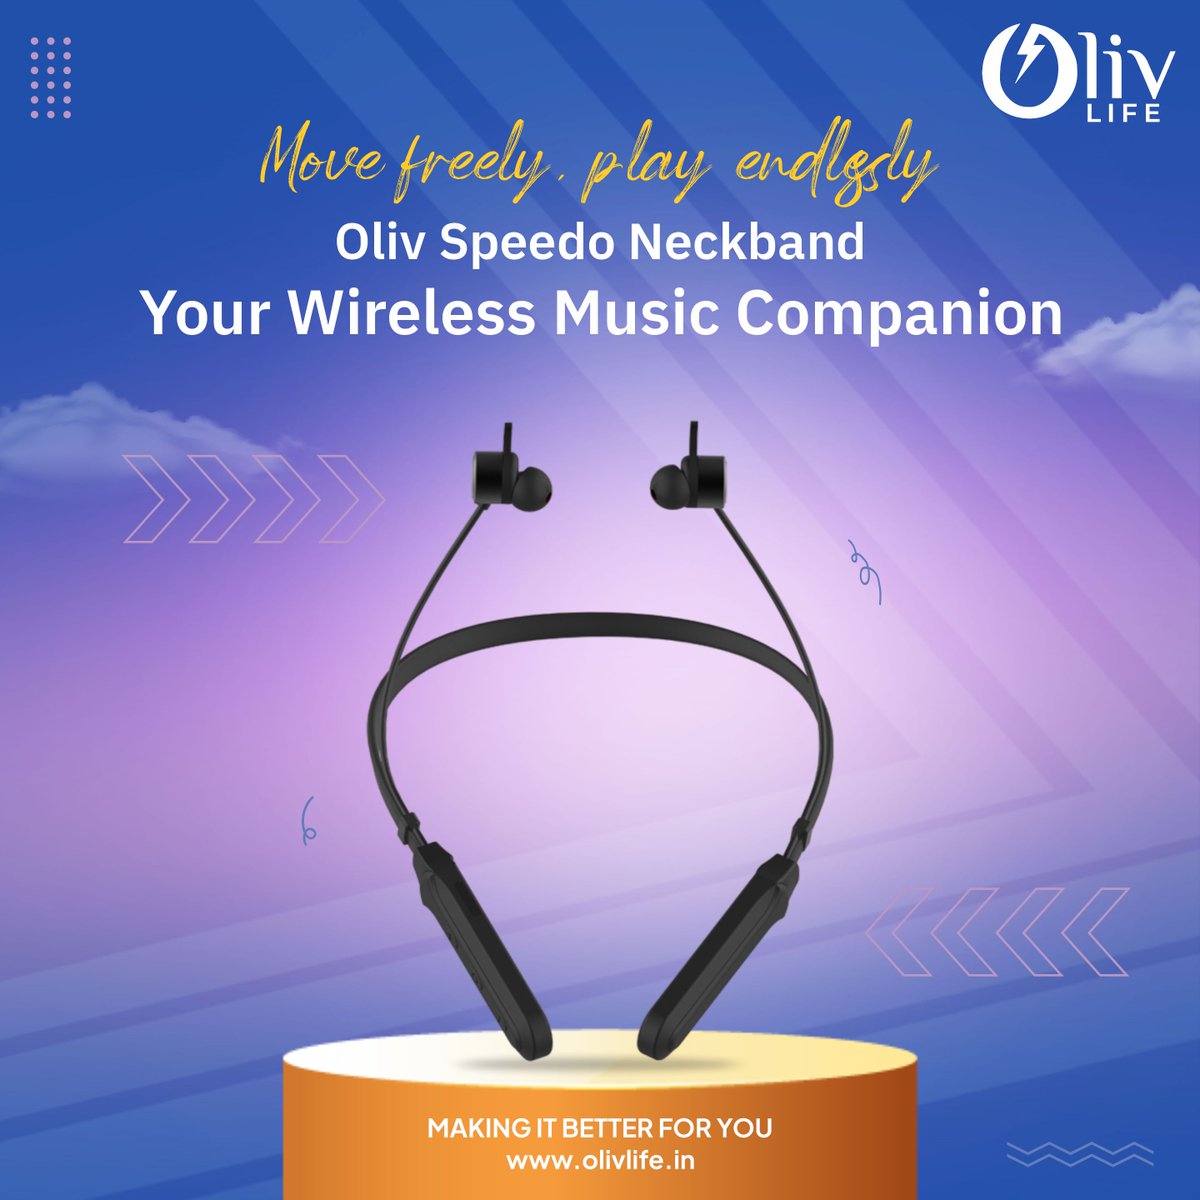 Level Up Your Game: Oliv Life Gaming Neckband.

Get Yours Today: bit.ly/49rlFIu

#neckband #bluetooth #mobileaccessories #earbuds #earphones #headphones #music #powerbank #mobile #accessories #wireless #madeinindia #earphone #neckbandearphones #speaker #datacable